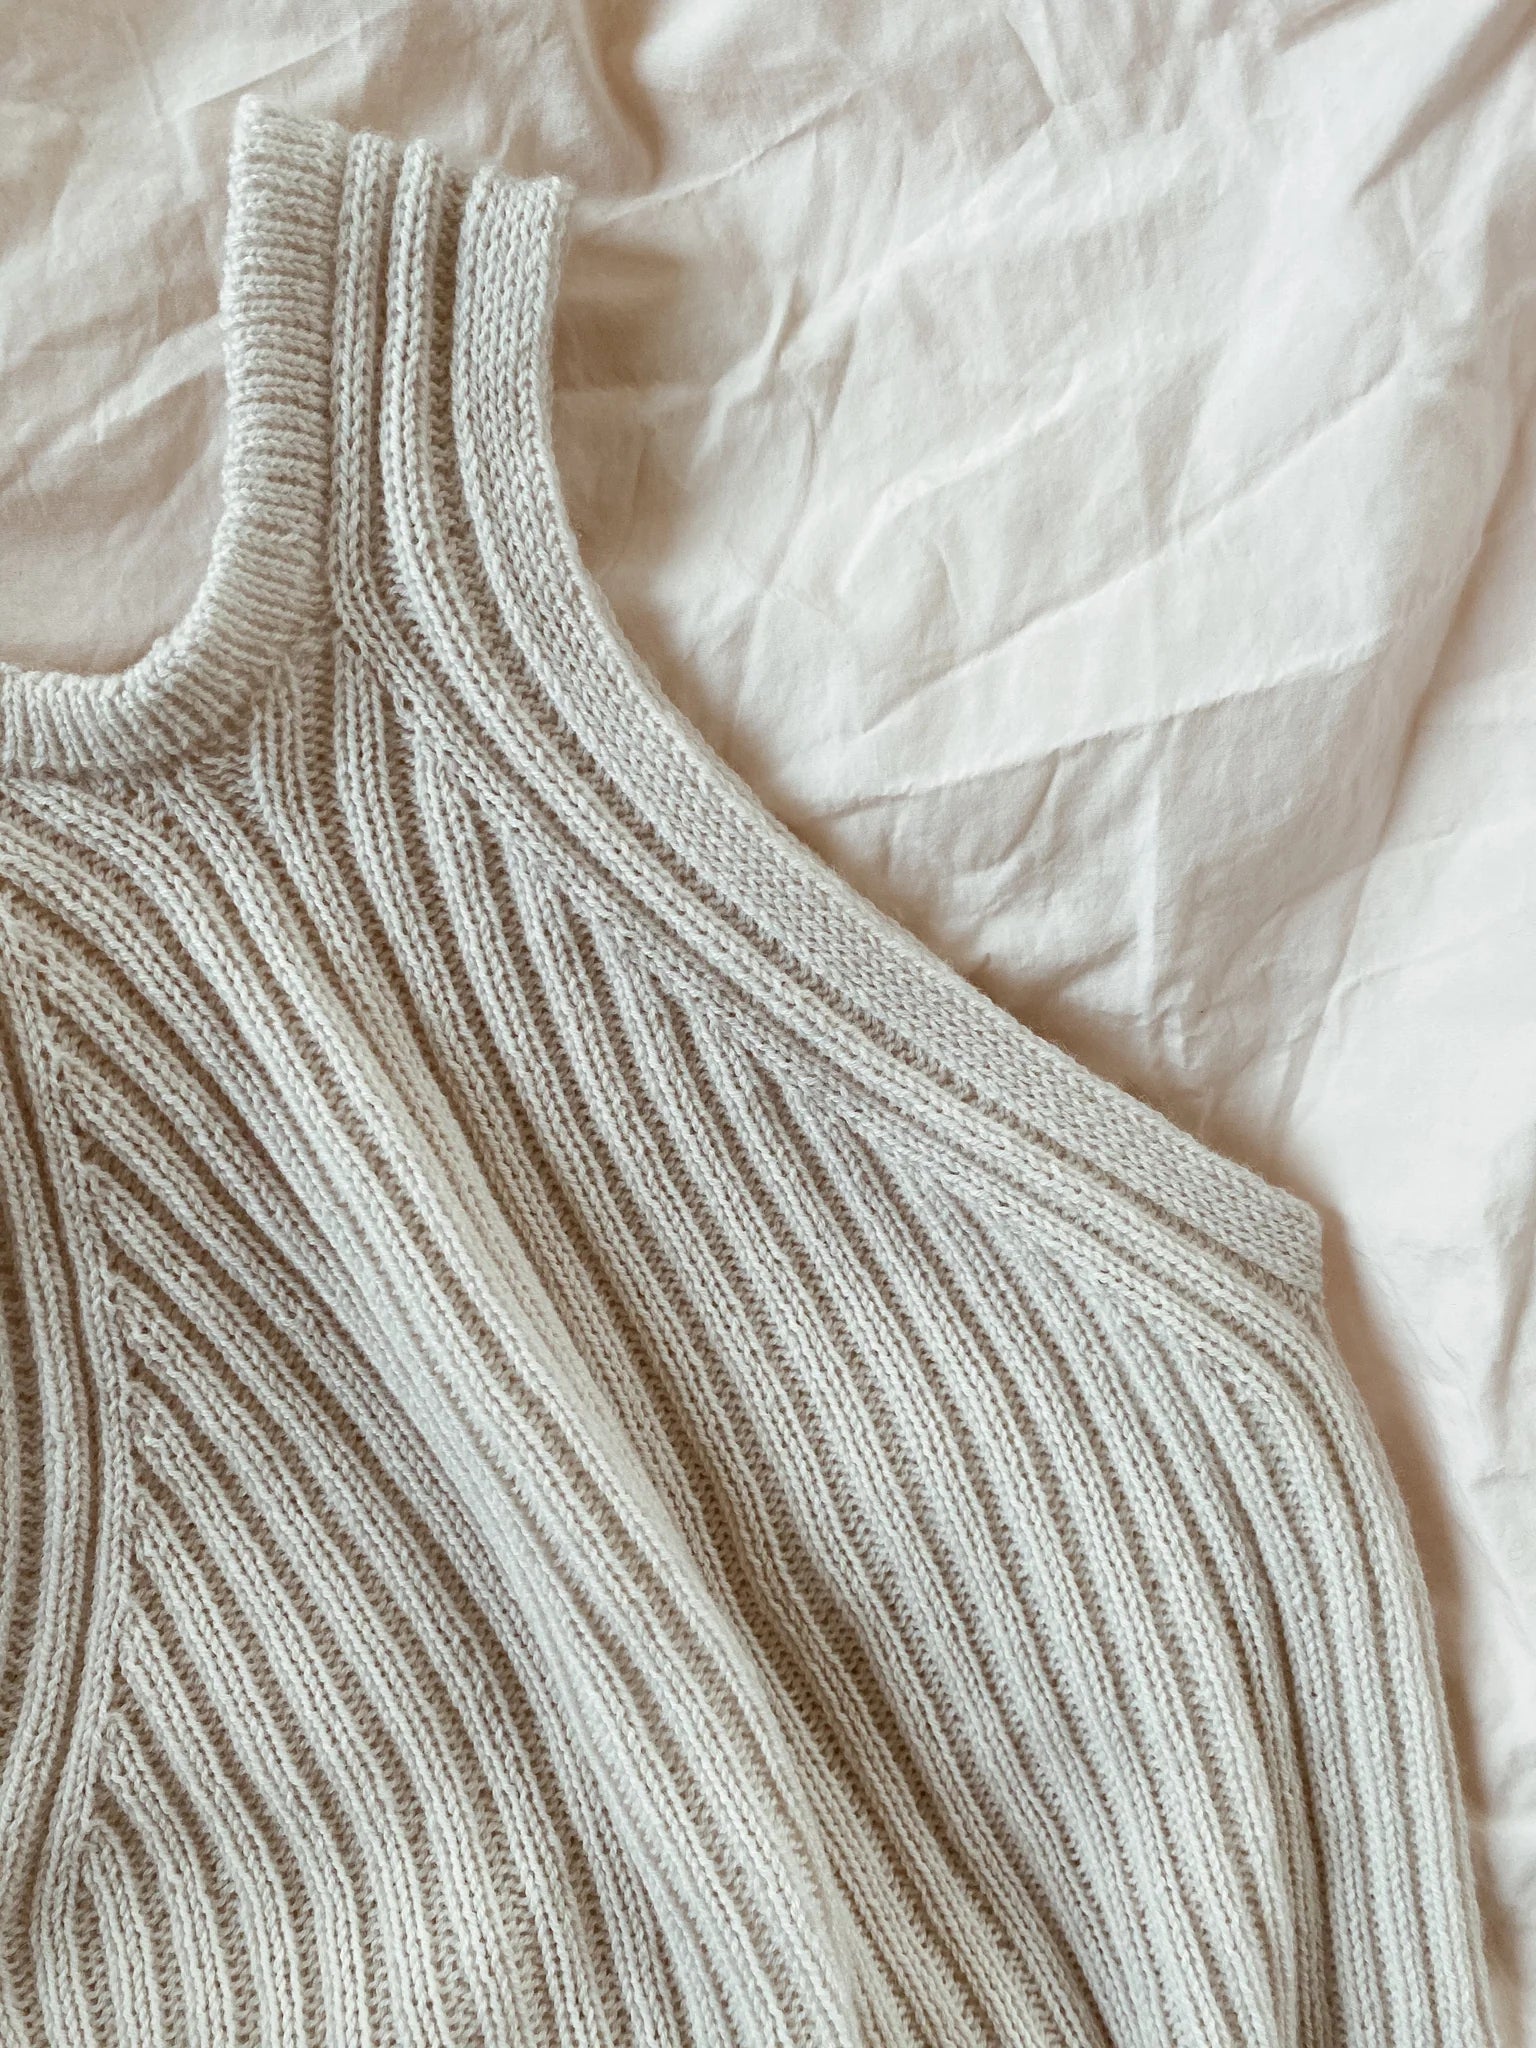 Camisole No. 5 My Favourite Things Knitwear – Strickpaket